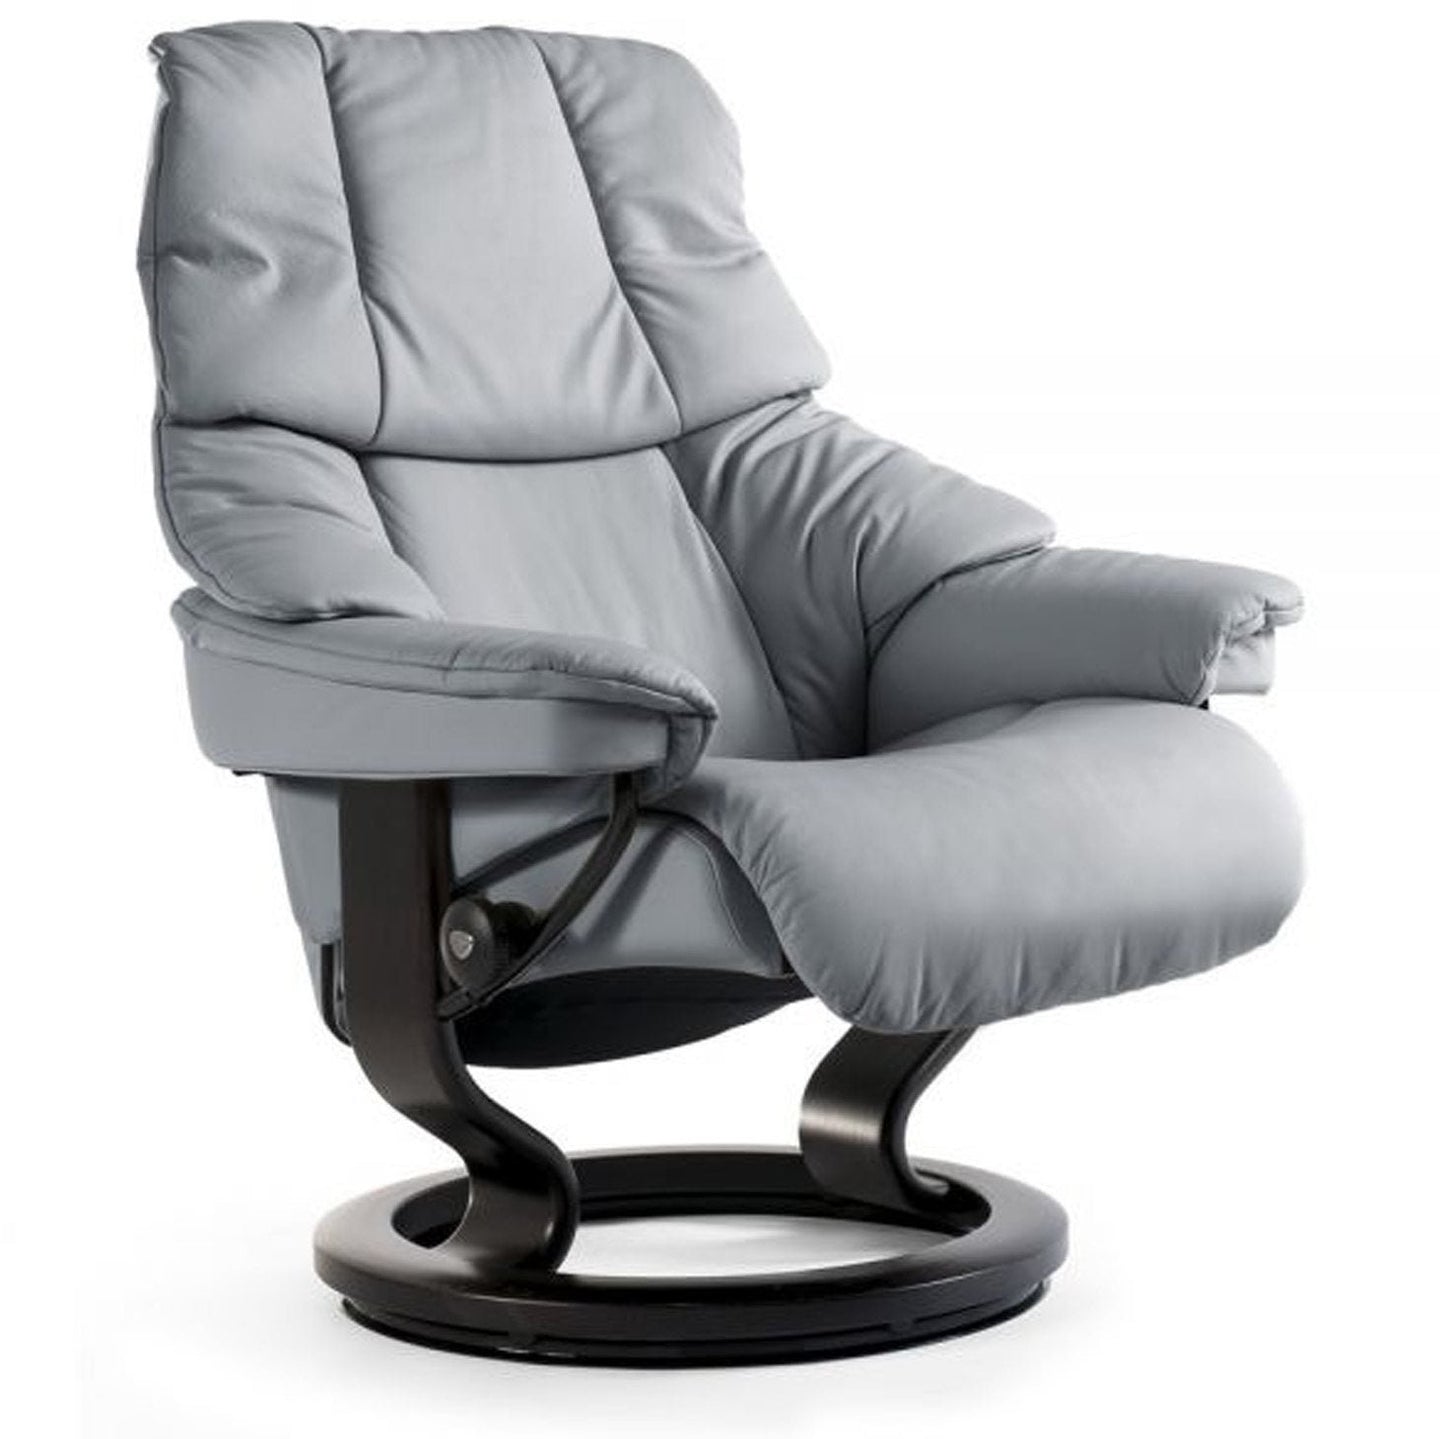 Stressless Reno Small Recliner Chair